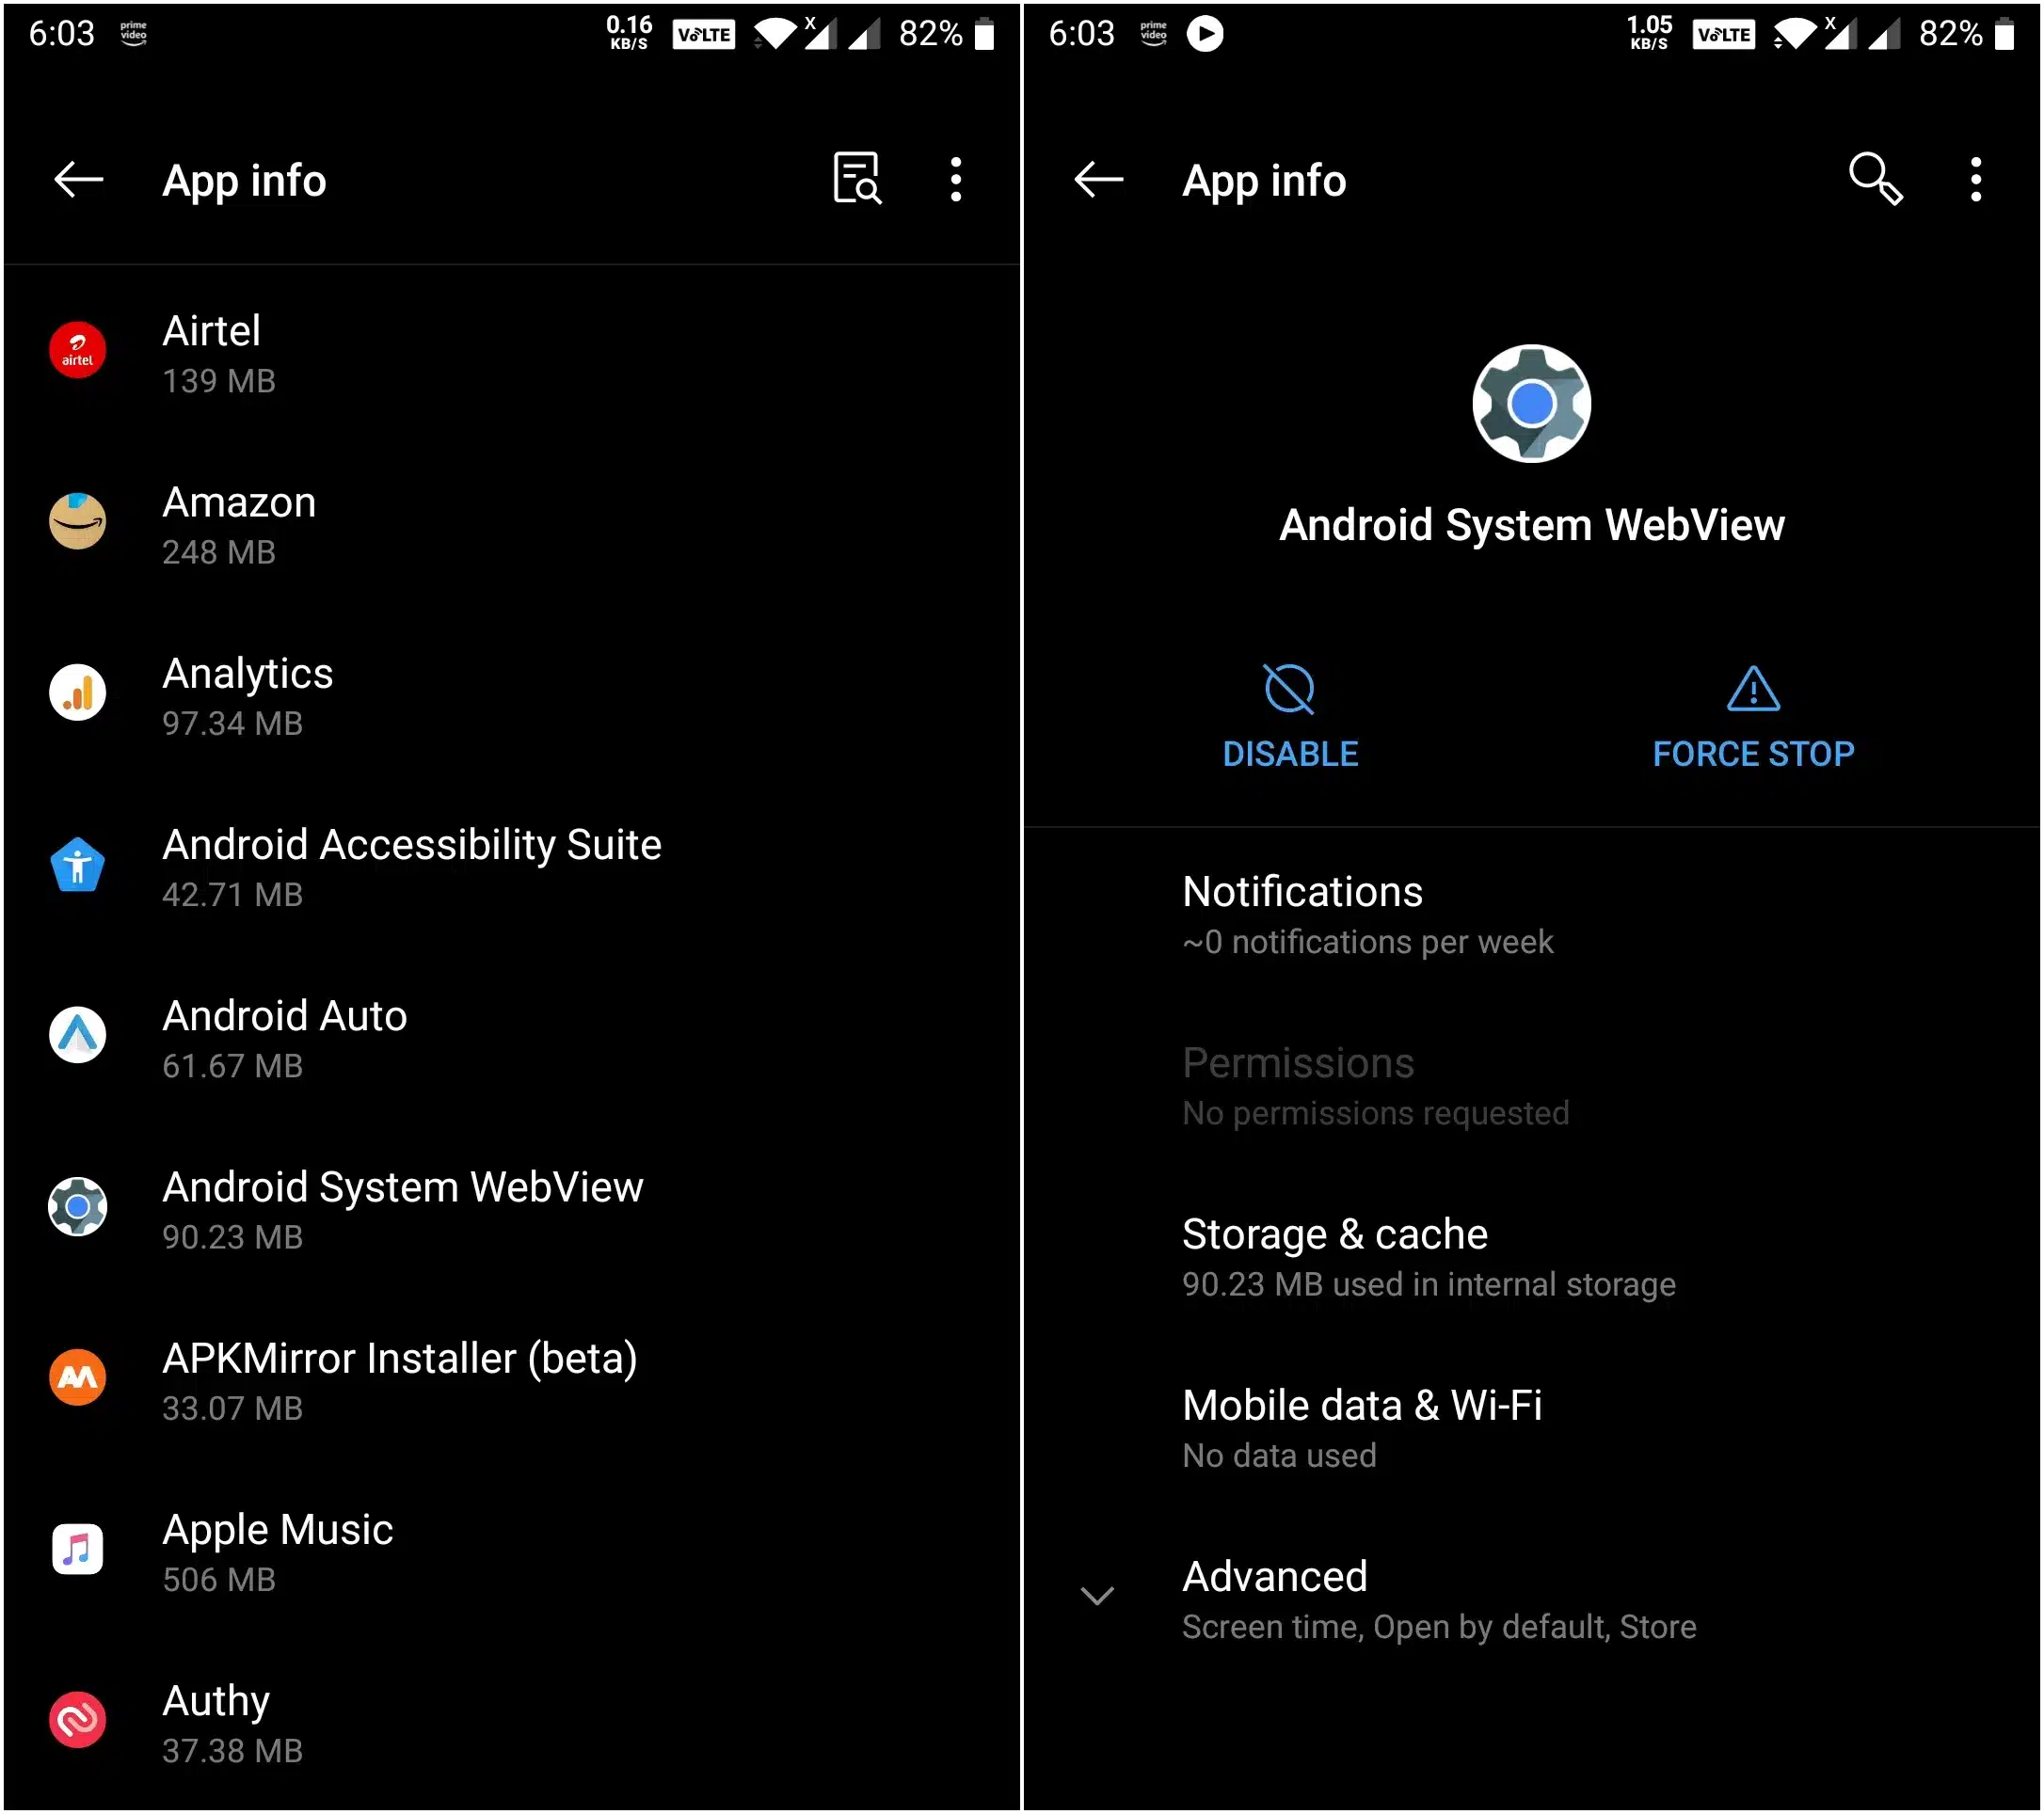 Disable Android System WebView from Settings